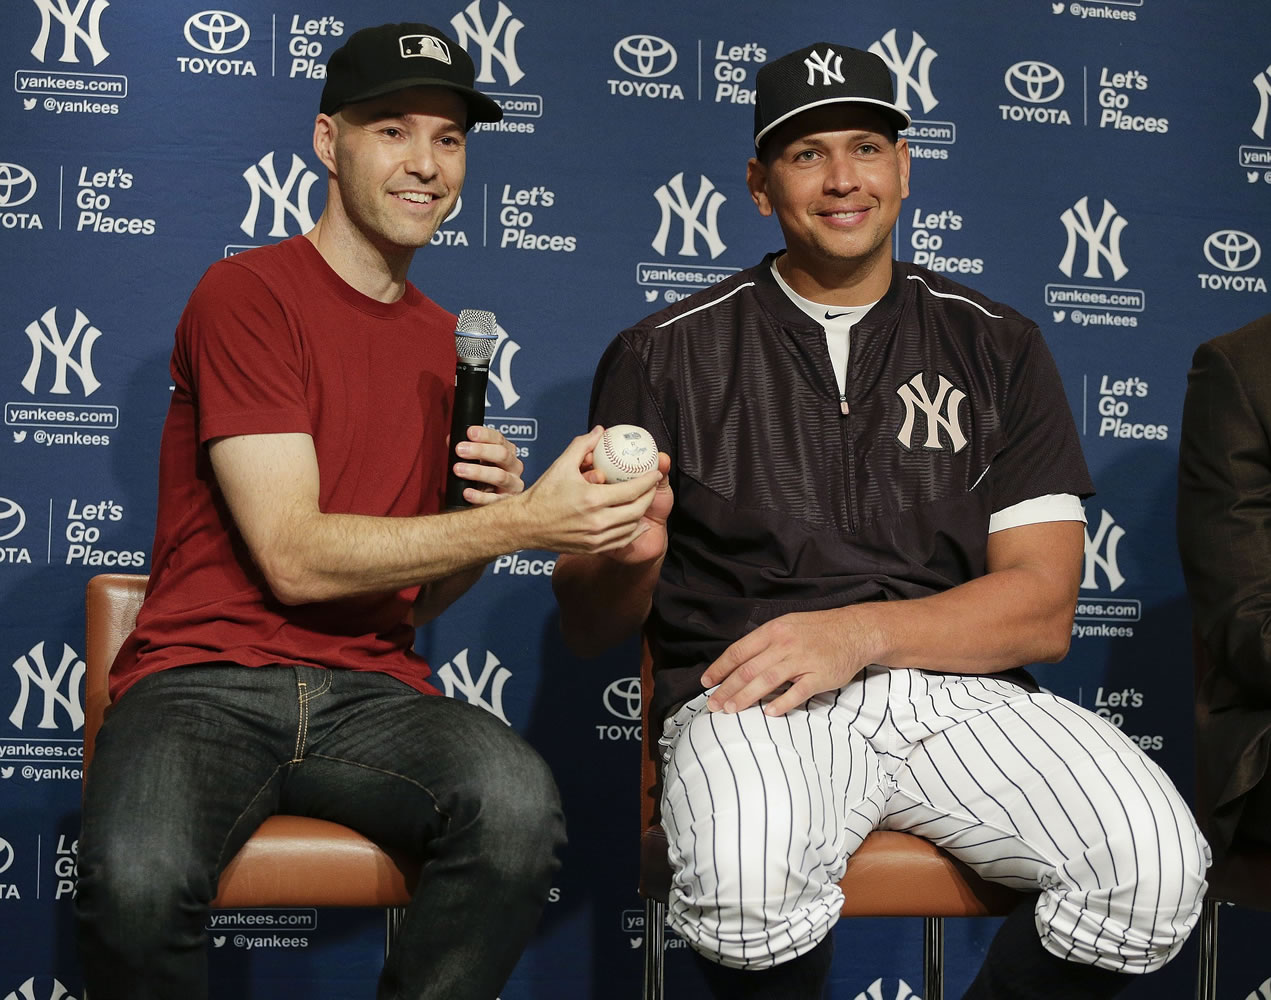 Zack Hample, left, presents New York Yankees Alex Rodriguez with the baseball on which Rodriguez got his 3,000th career hit during a news conference, Friday, July 3, 2015, in New York. Hample caught the ball, which was a solo home run to right field on Friday, June 19, against the Detroit Tigers.